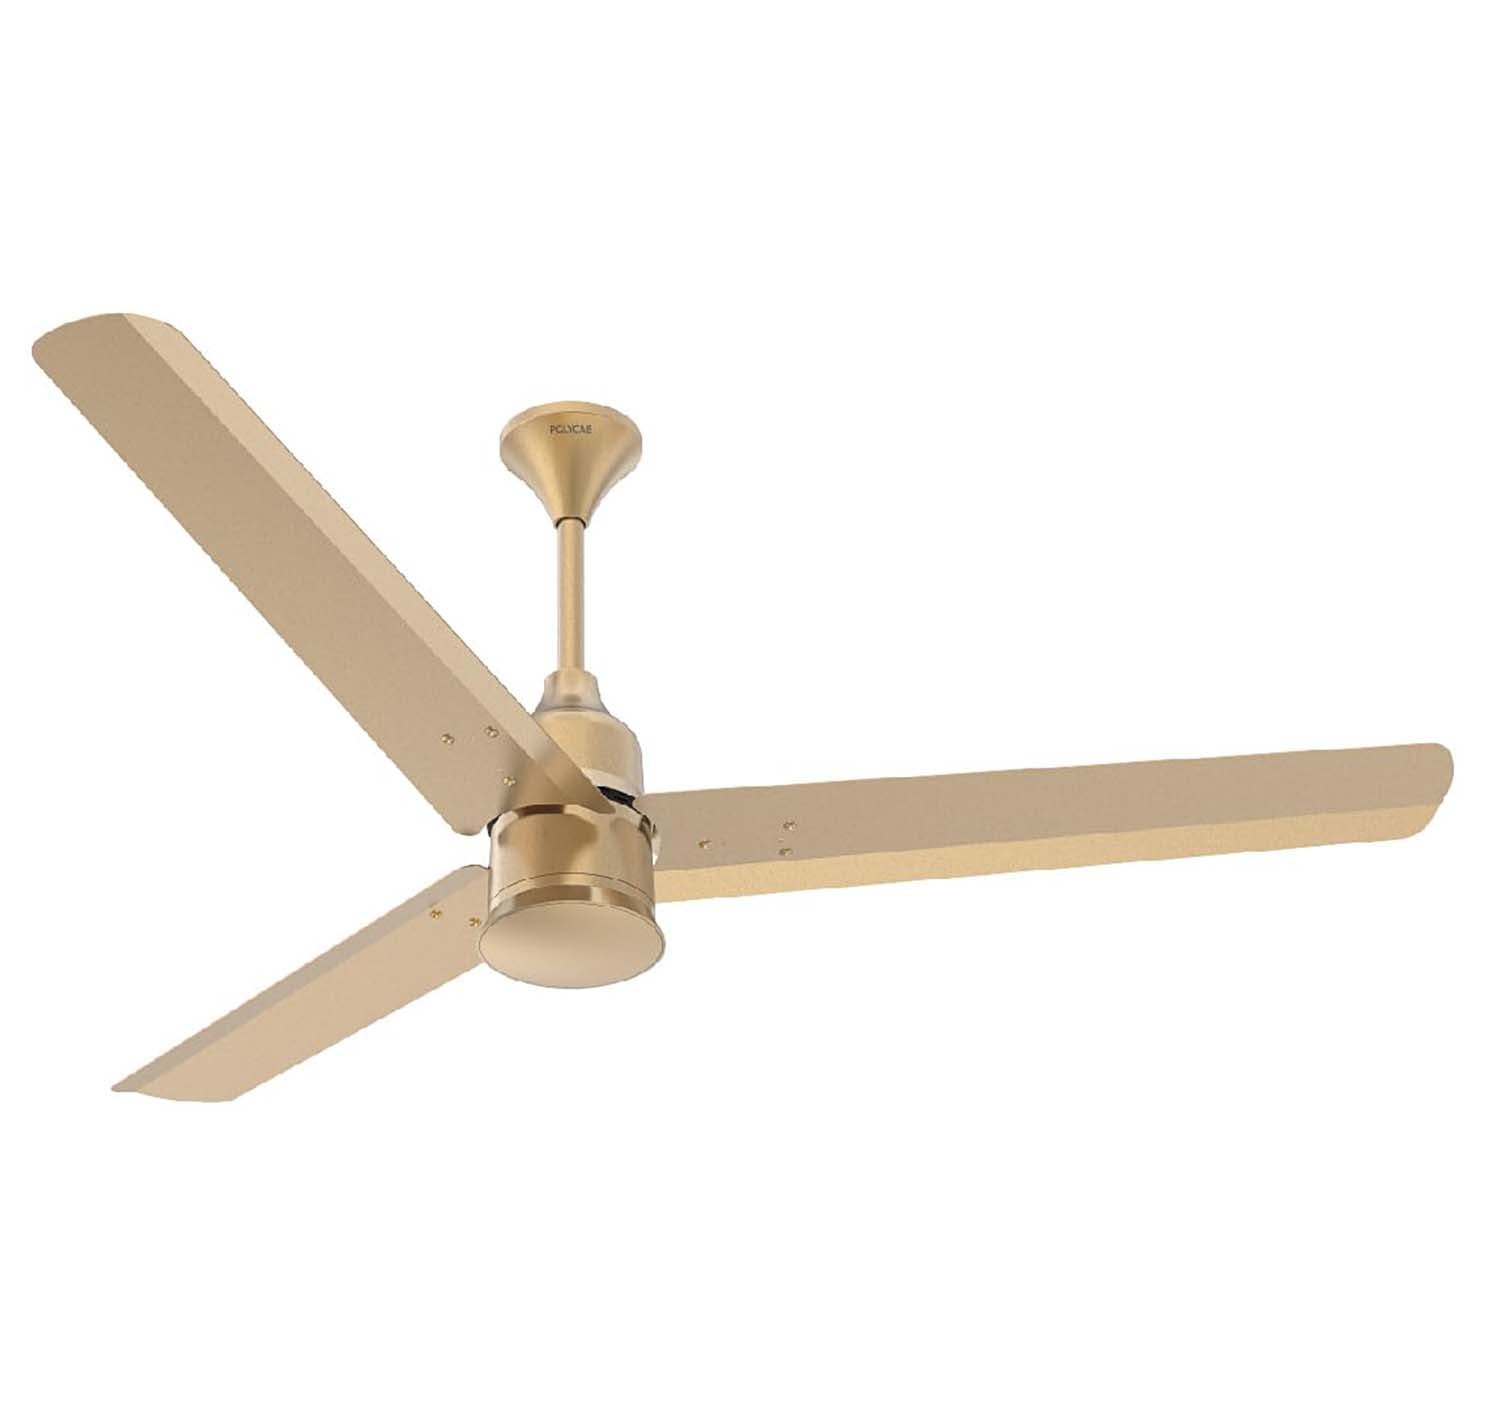 Polycab Silenco Advance BLDC Mini Ceiling Fan With 5 Star Rated - 1200mm - Birkin Gold